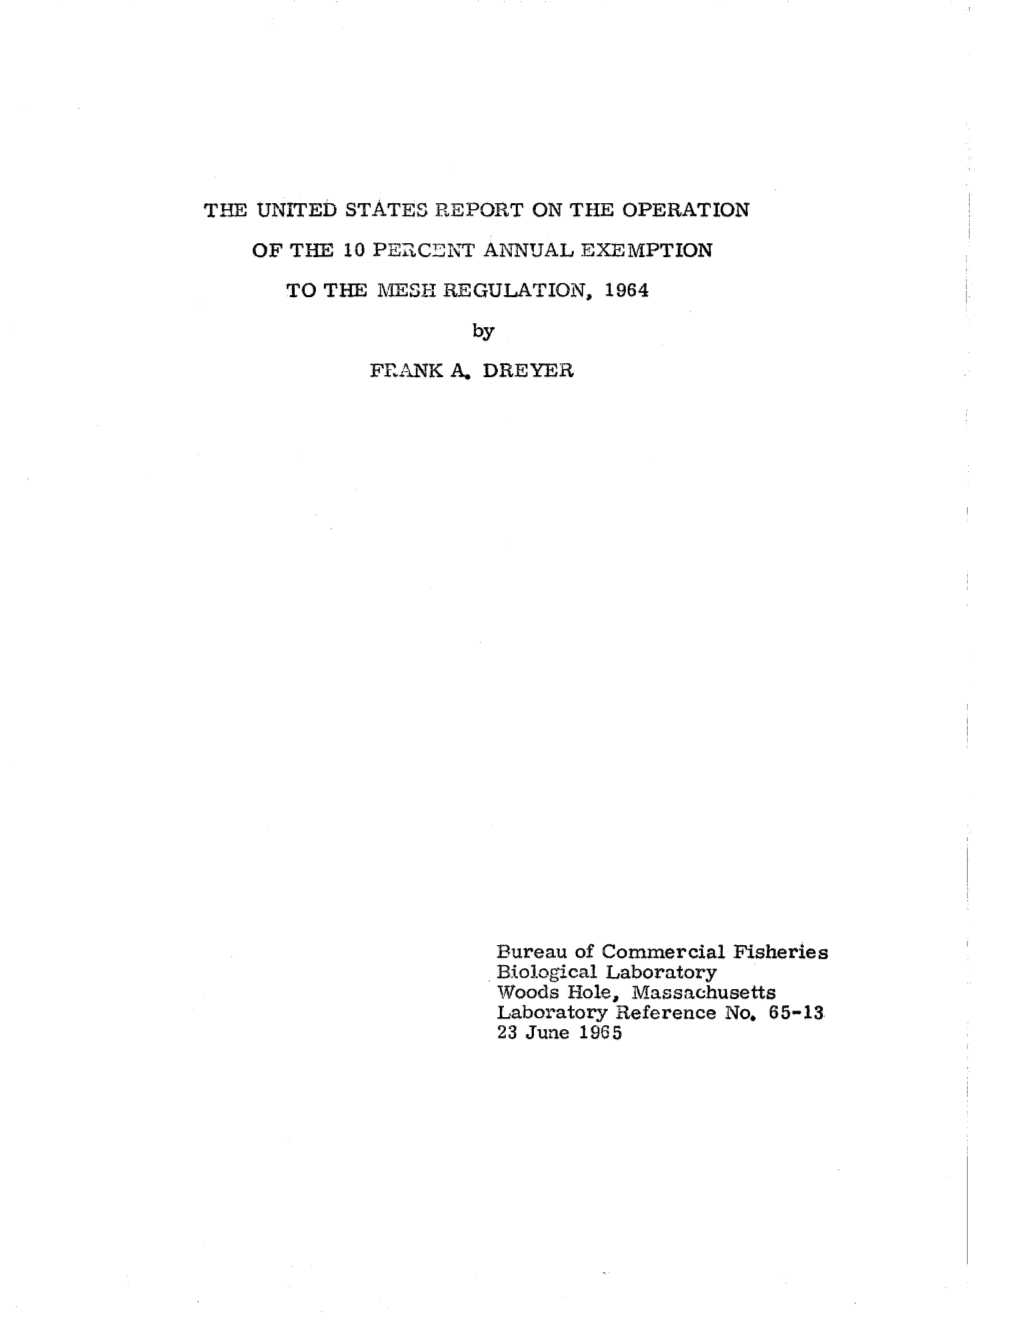 The United States Report on the Operation of the 10 Percent Annual